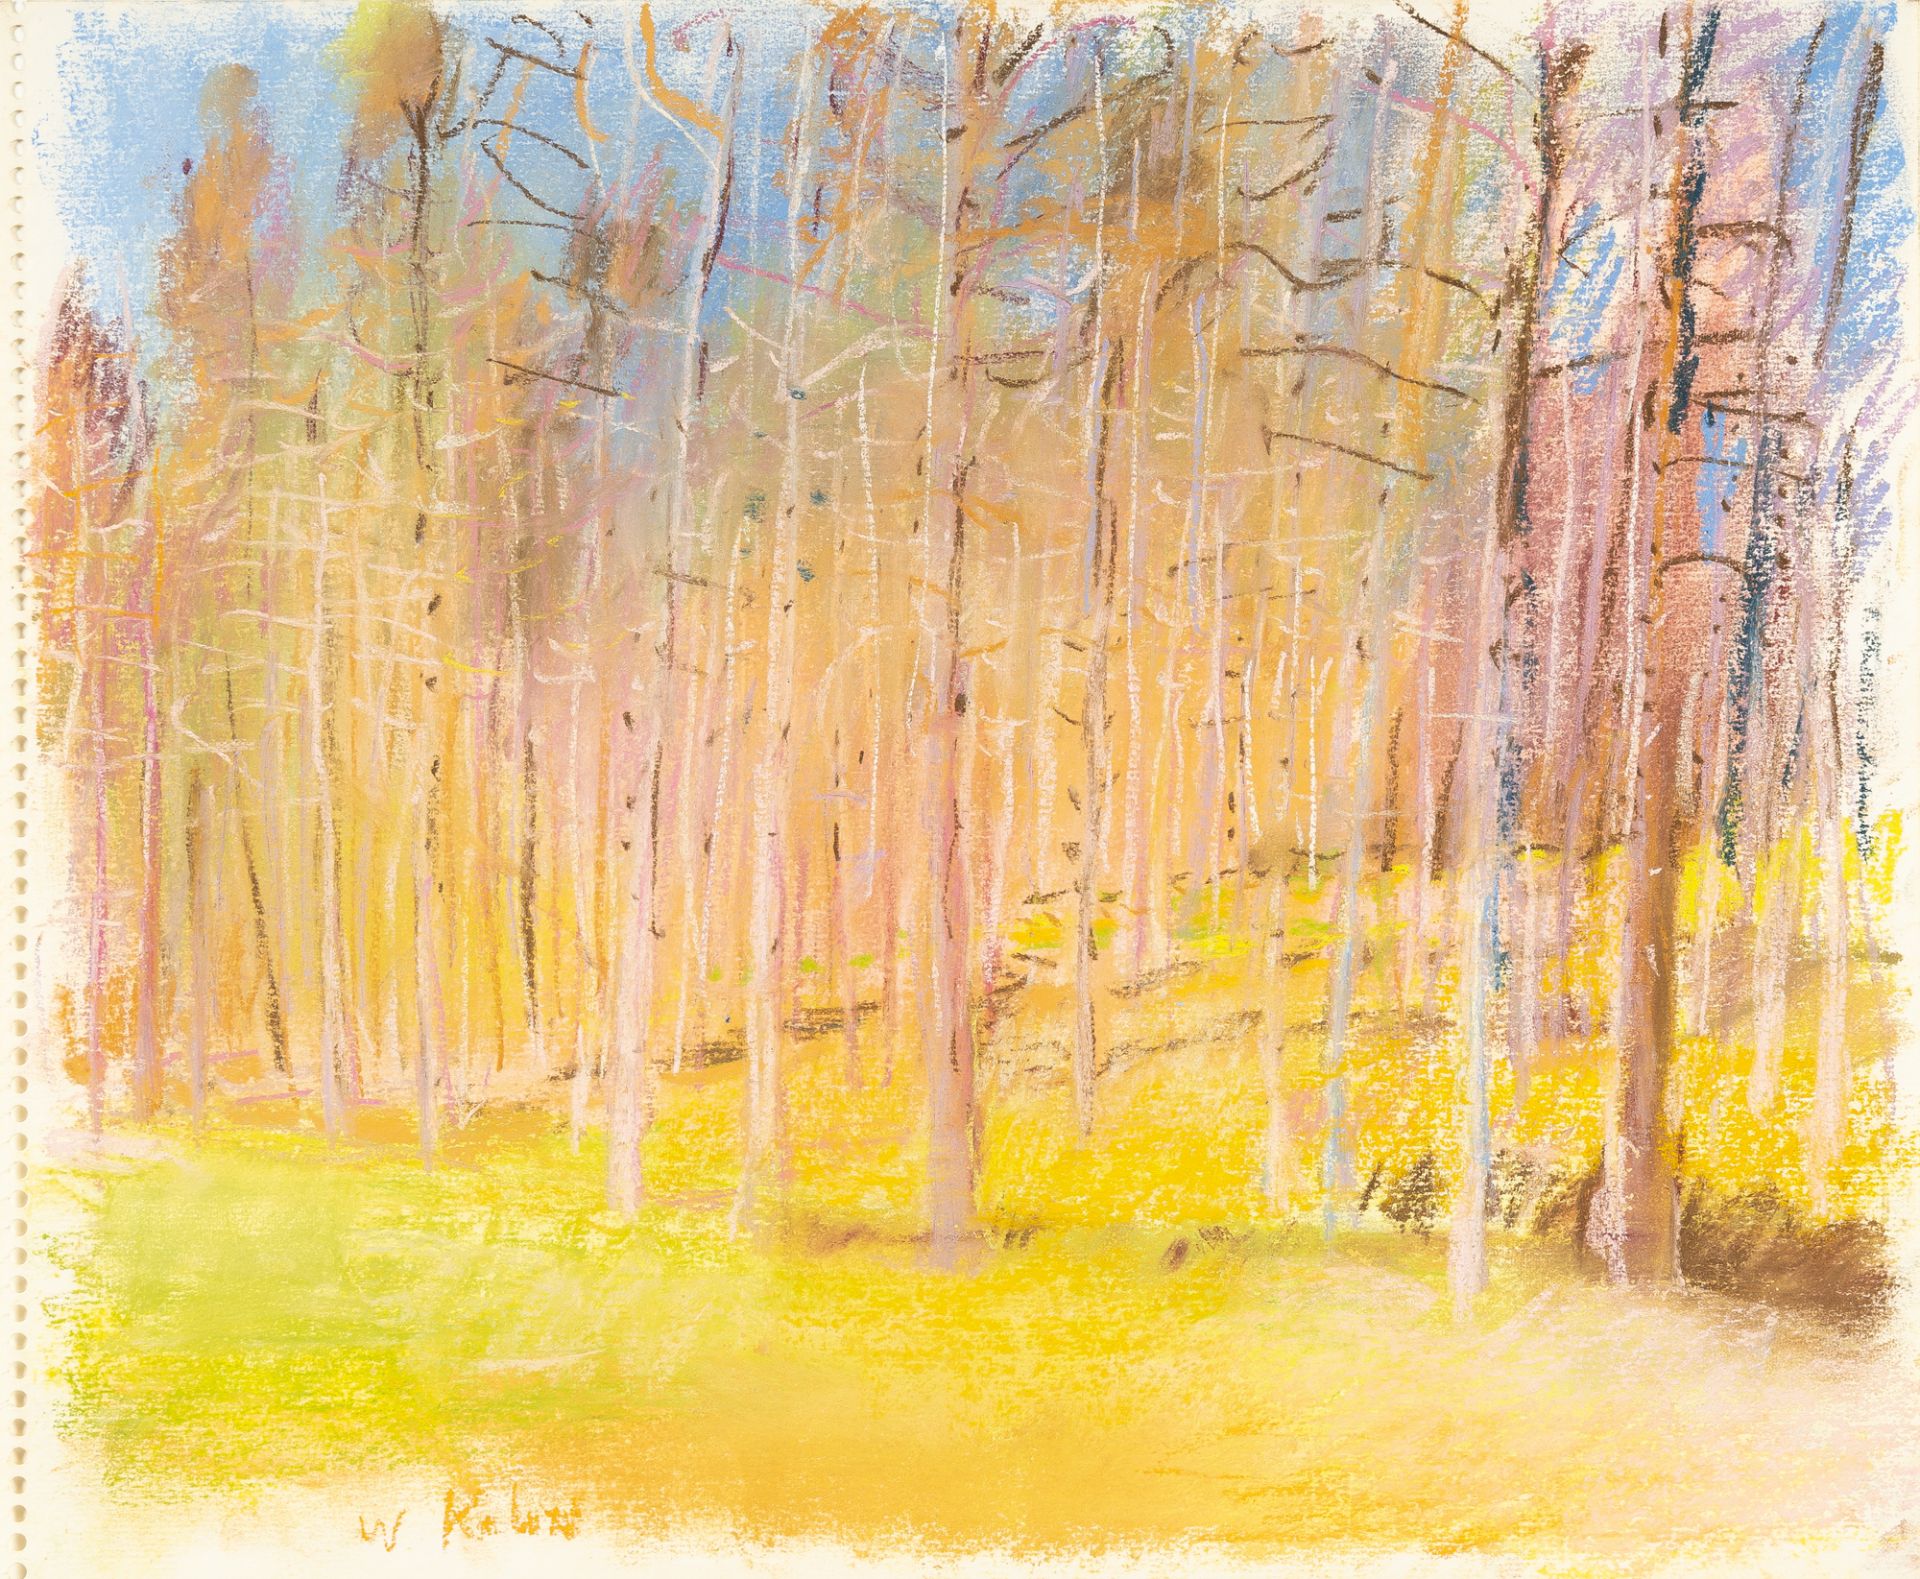 Wolf Kahn, Slight incline in a forest.Pastel on writing pad paper. (1999). Ca. 35 x 43 cm. Signed